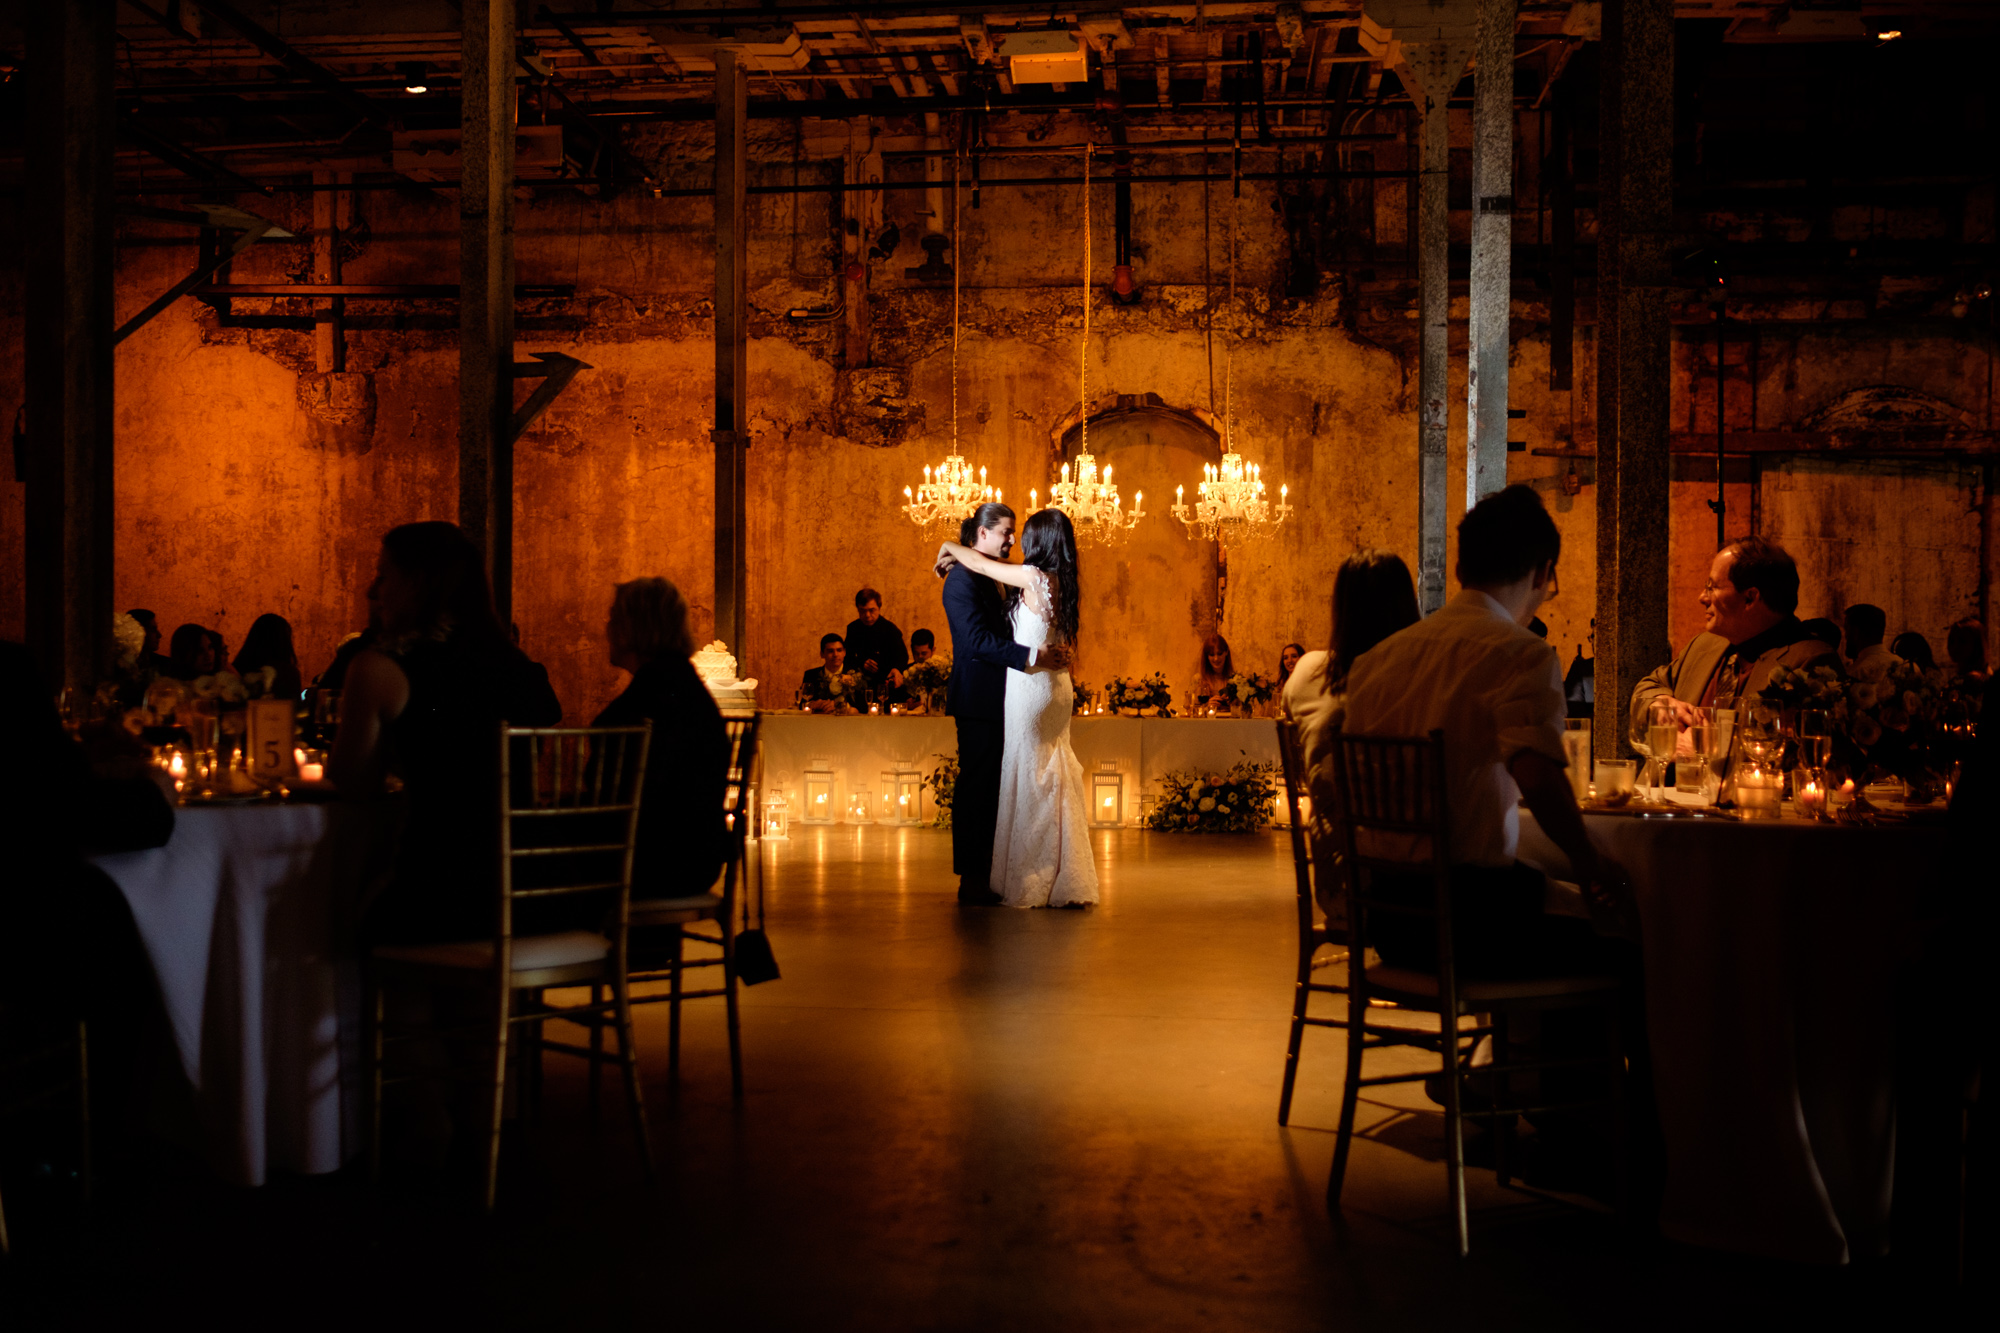  Danni + Felipe have their first dance as a married couple during their wedding reception at Toronto's Fermenting Cellar.&nbsp; 